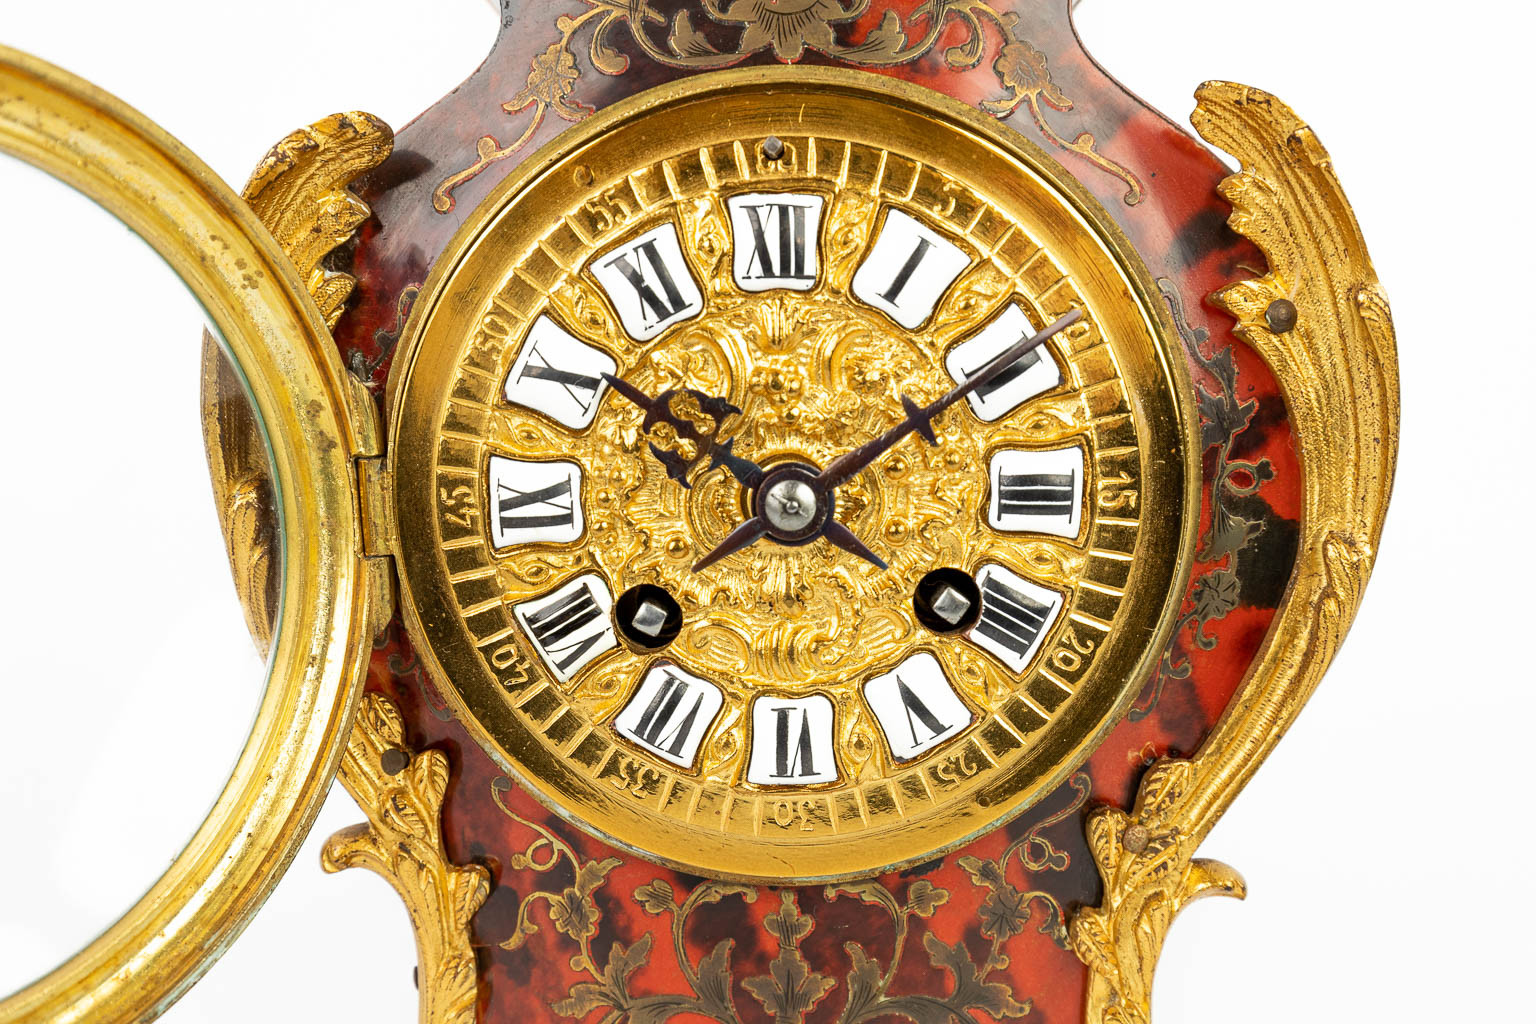 A mantle clock decorated with boulle inlay and mounted with bronze in Louis XV style. (H:33cm)